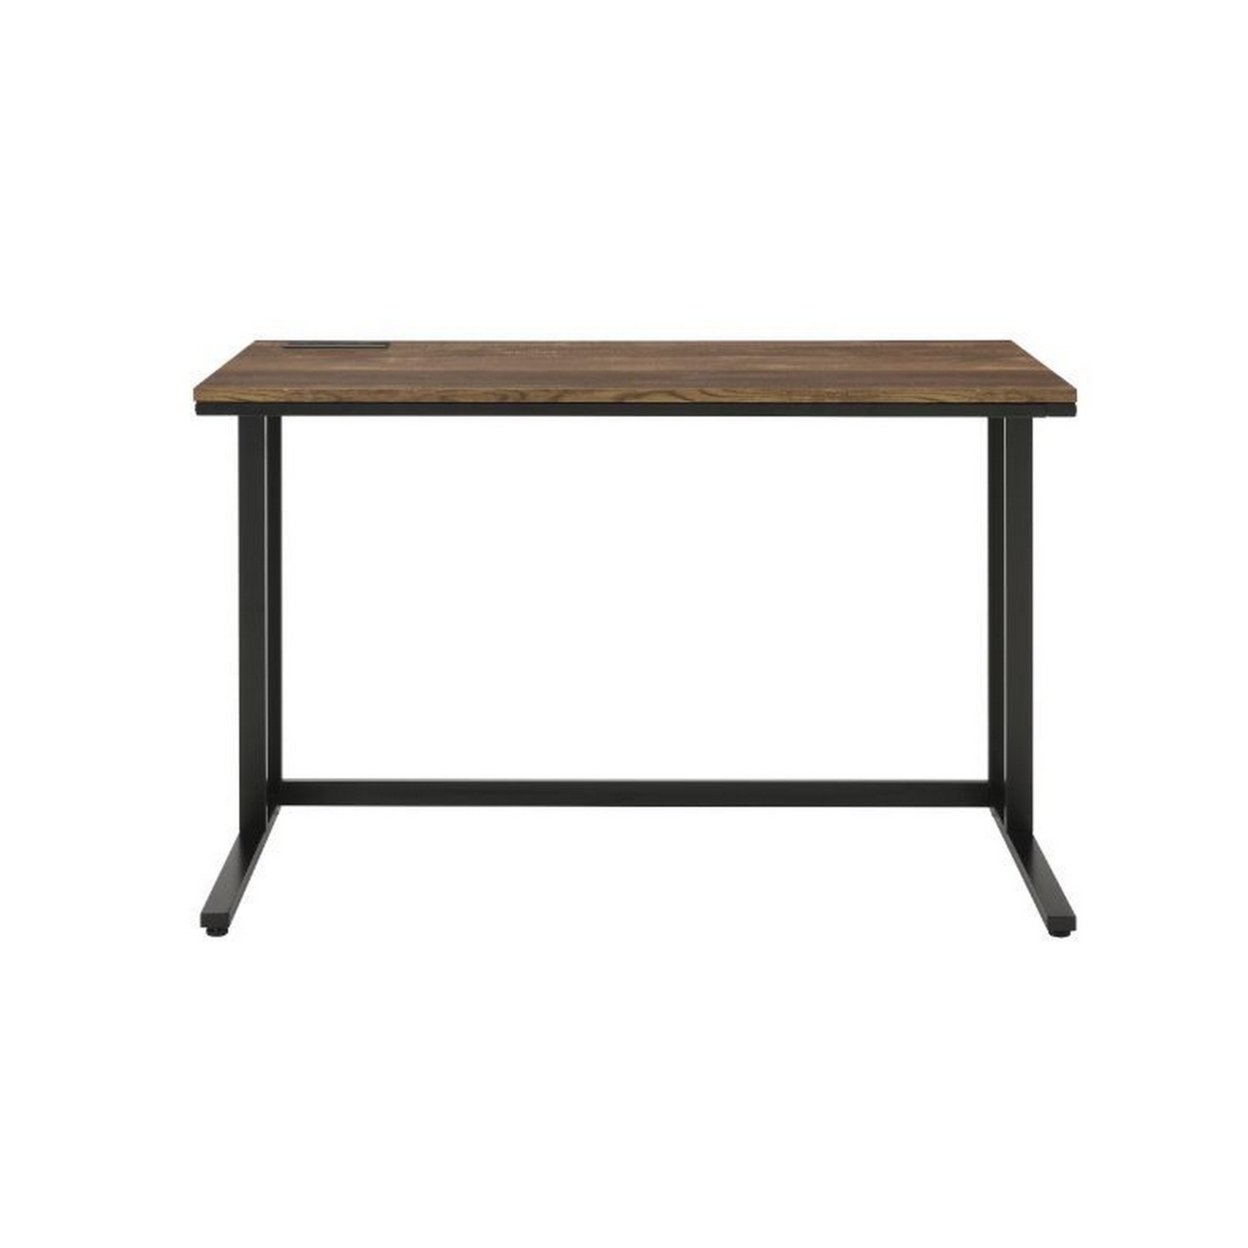 Writing Desk With Wooden Top And Built In USB Port, Brown And Black- Saltoro Sherpi